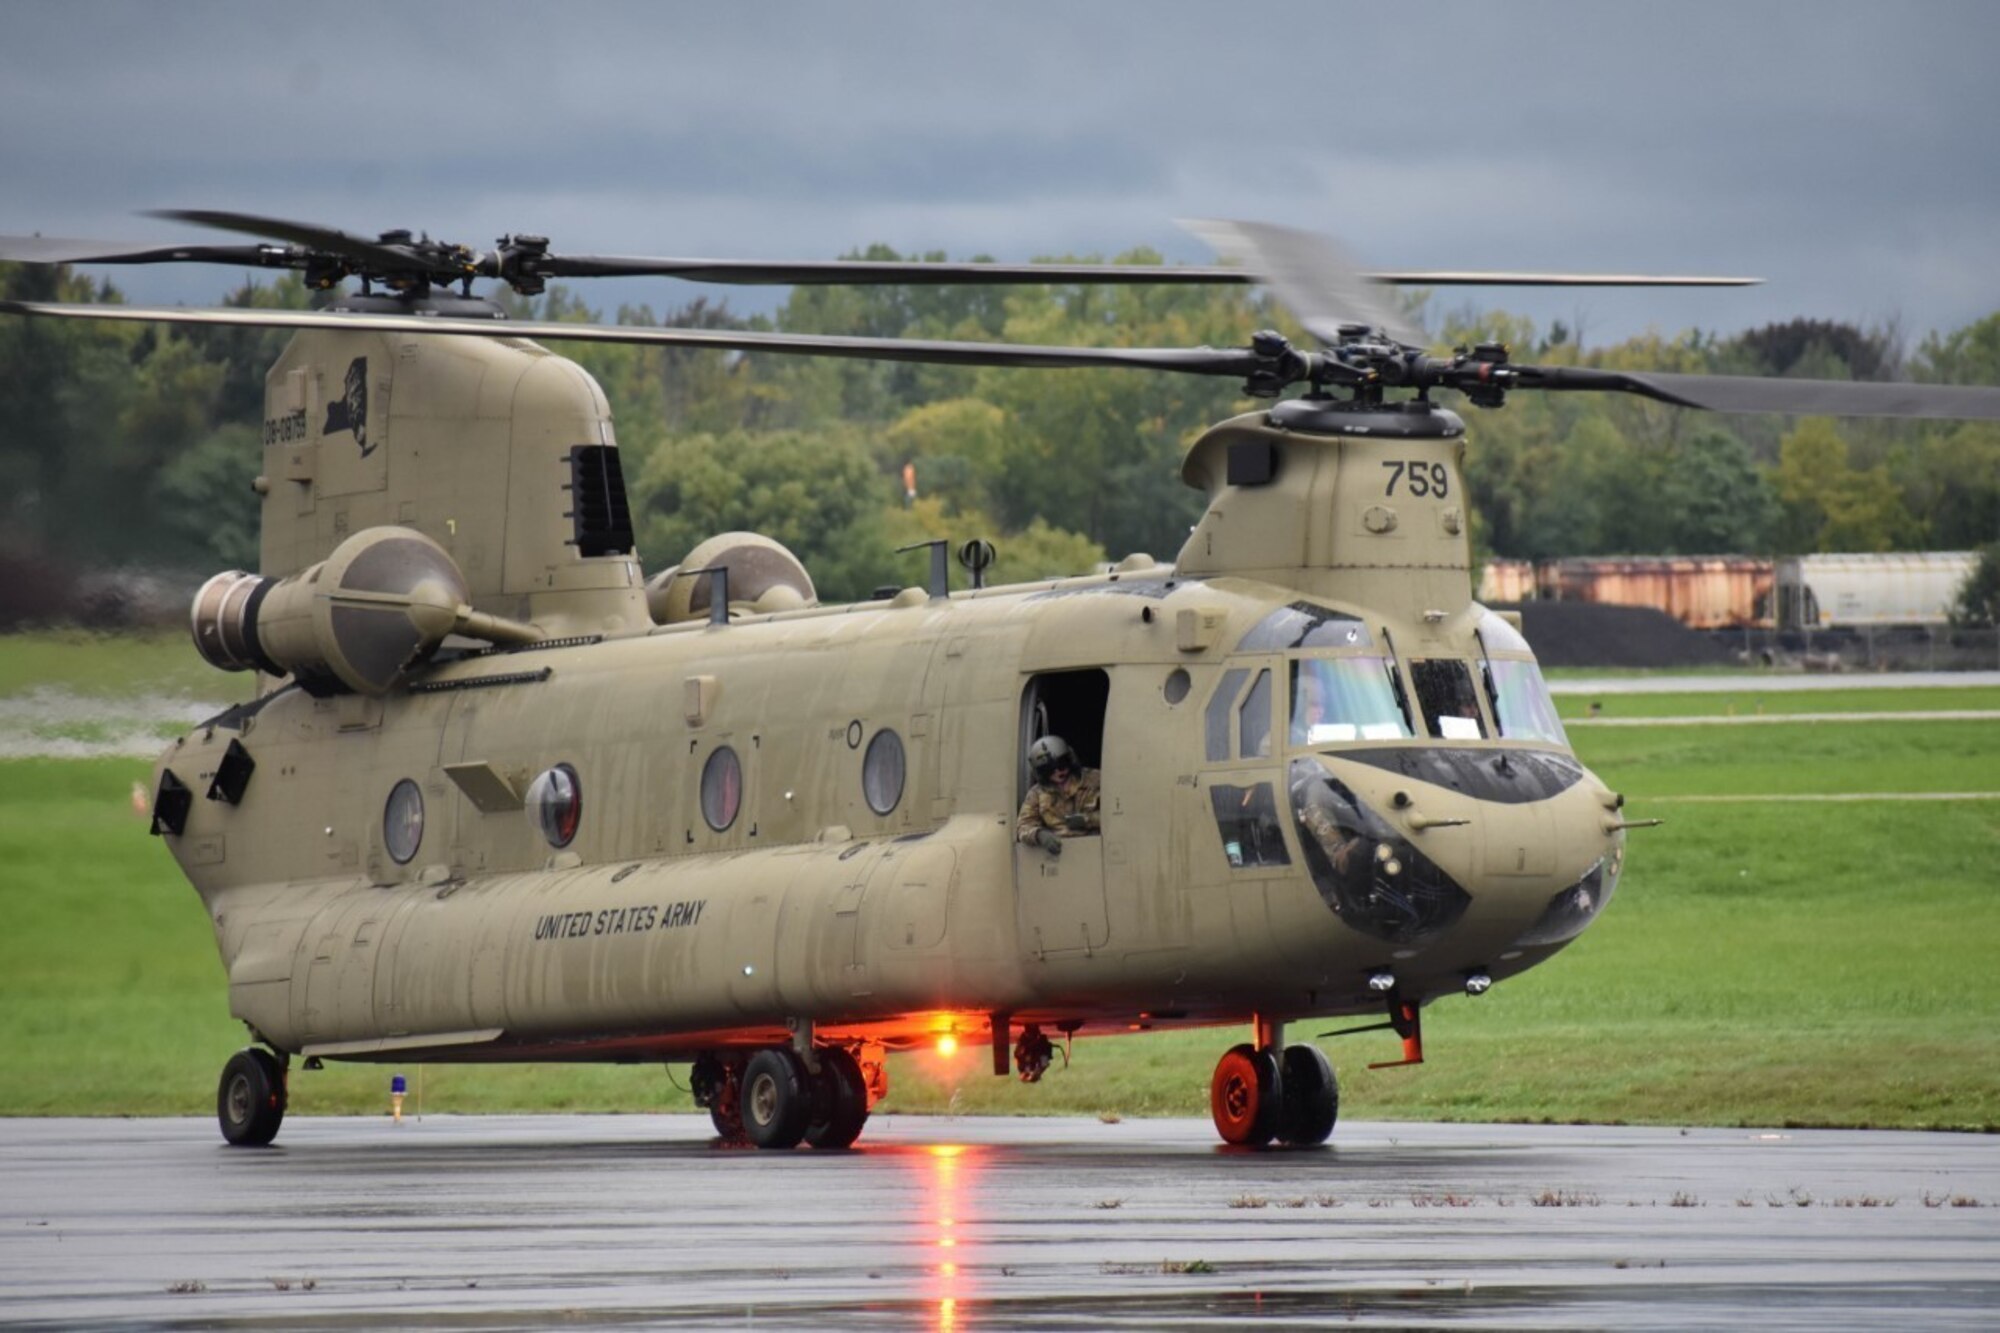 A New York Army National Guard CH-47F Chinook helicopter  takes off from the Frederick Douglas Greater Rochester International Airport Sept. 28, 2022, heading for Jacksonville, Florida, to support the Florida National Guard response to Hurricane Ian. Two aircraft and 11 Soldiers were deployed for the mission at the direction of Gov. Kathy Hochul.